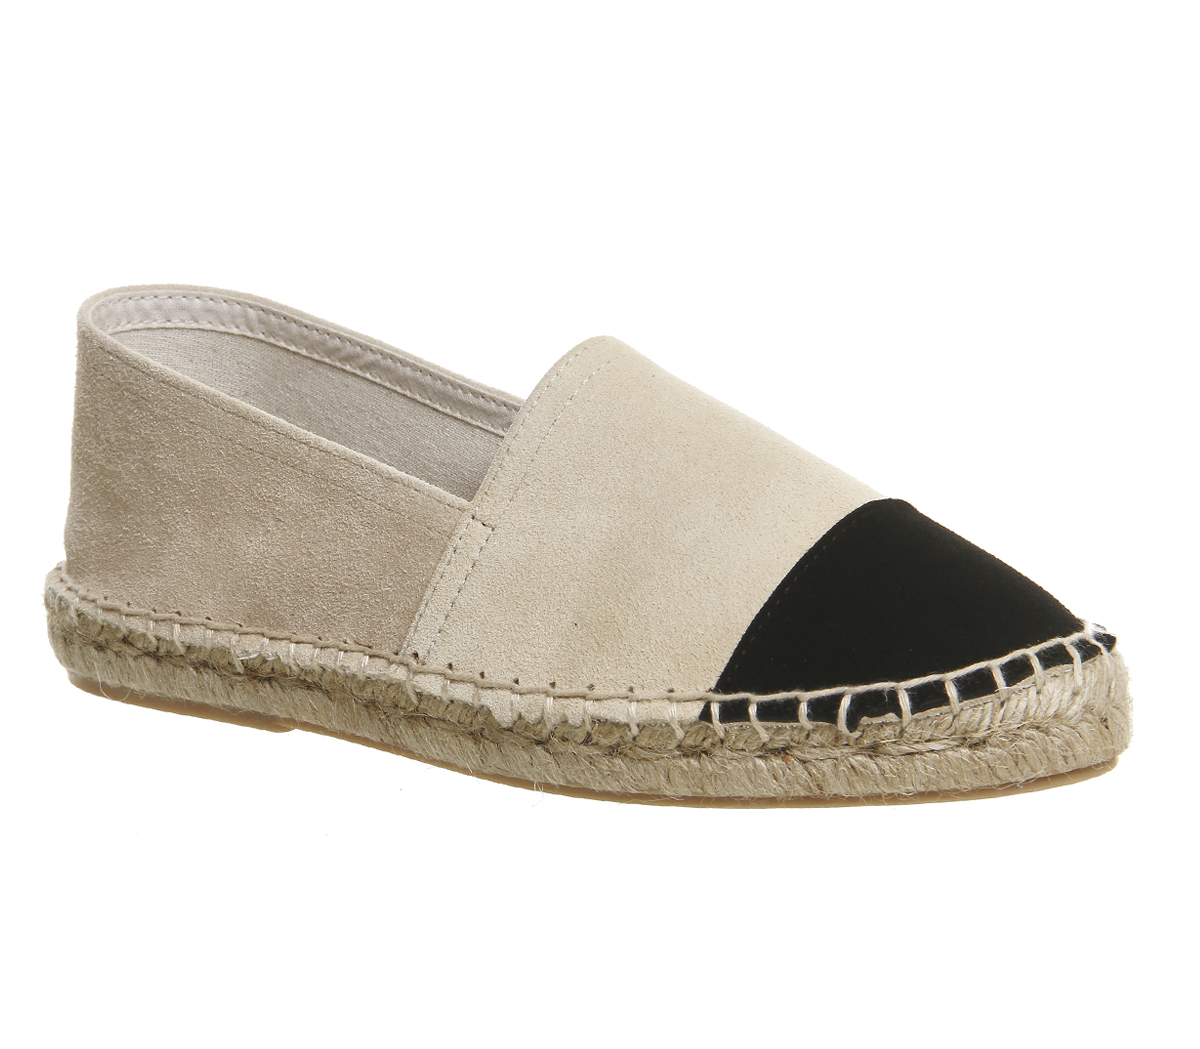 OFFICE Lucky Espadrilles Natural Black Suede - Flat Shoes for Women